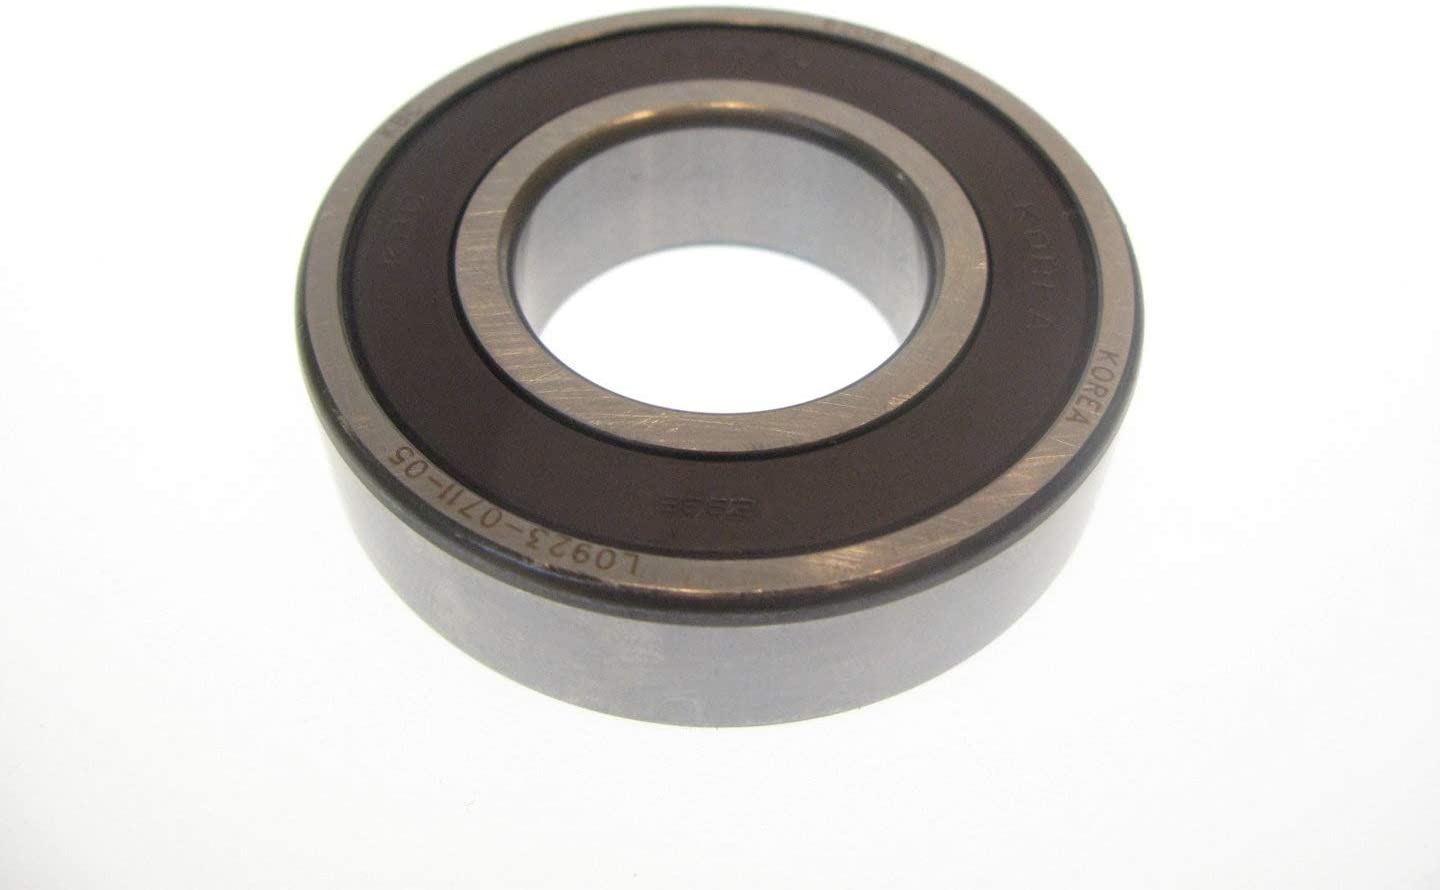 LG Washer Rear Outer Tub Ball Bearing Seal. Part #MAP61913715